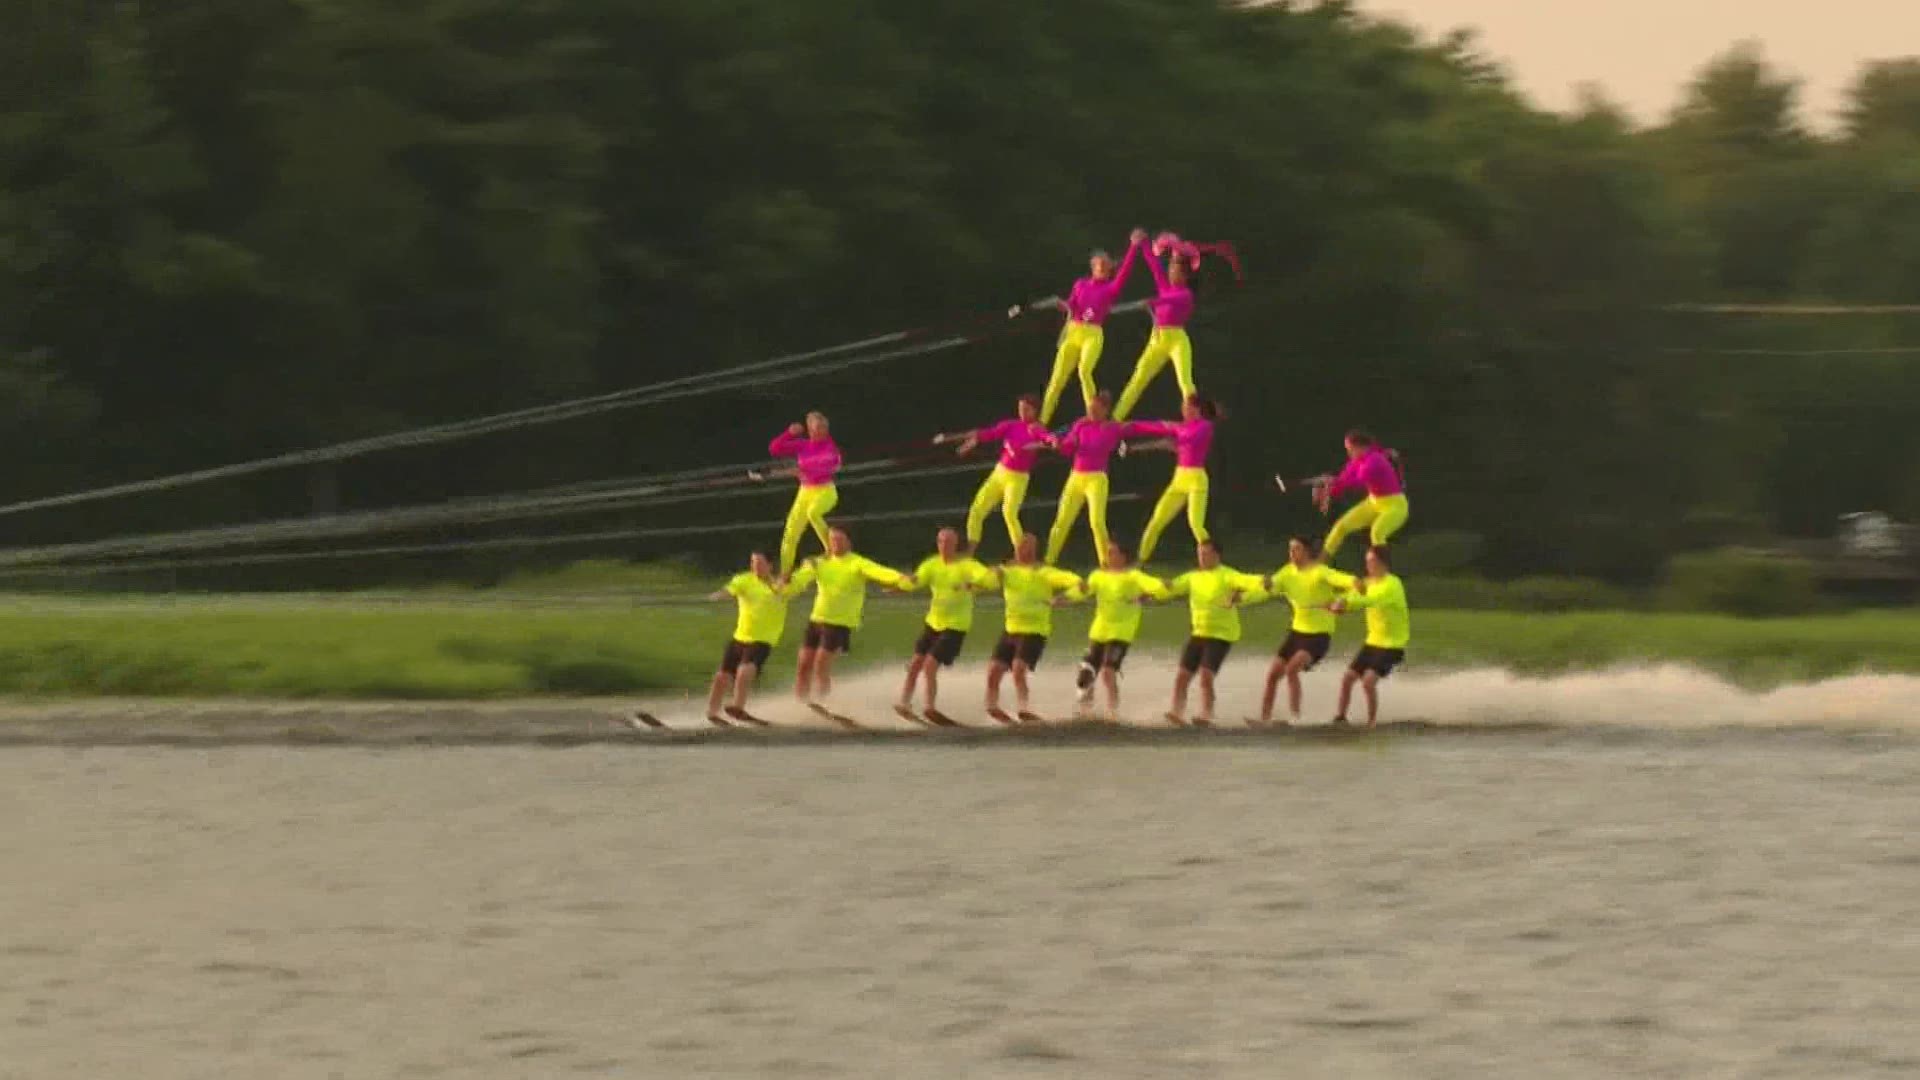 Maine Attraction Water Ski Show Team has been dazzling spectators for more than 30 years with free summer shows on Number One Pond in Sanford.